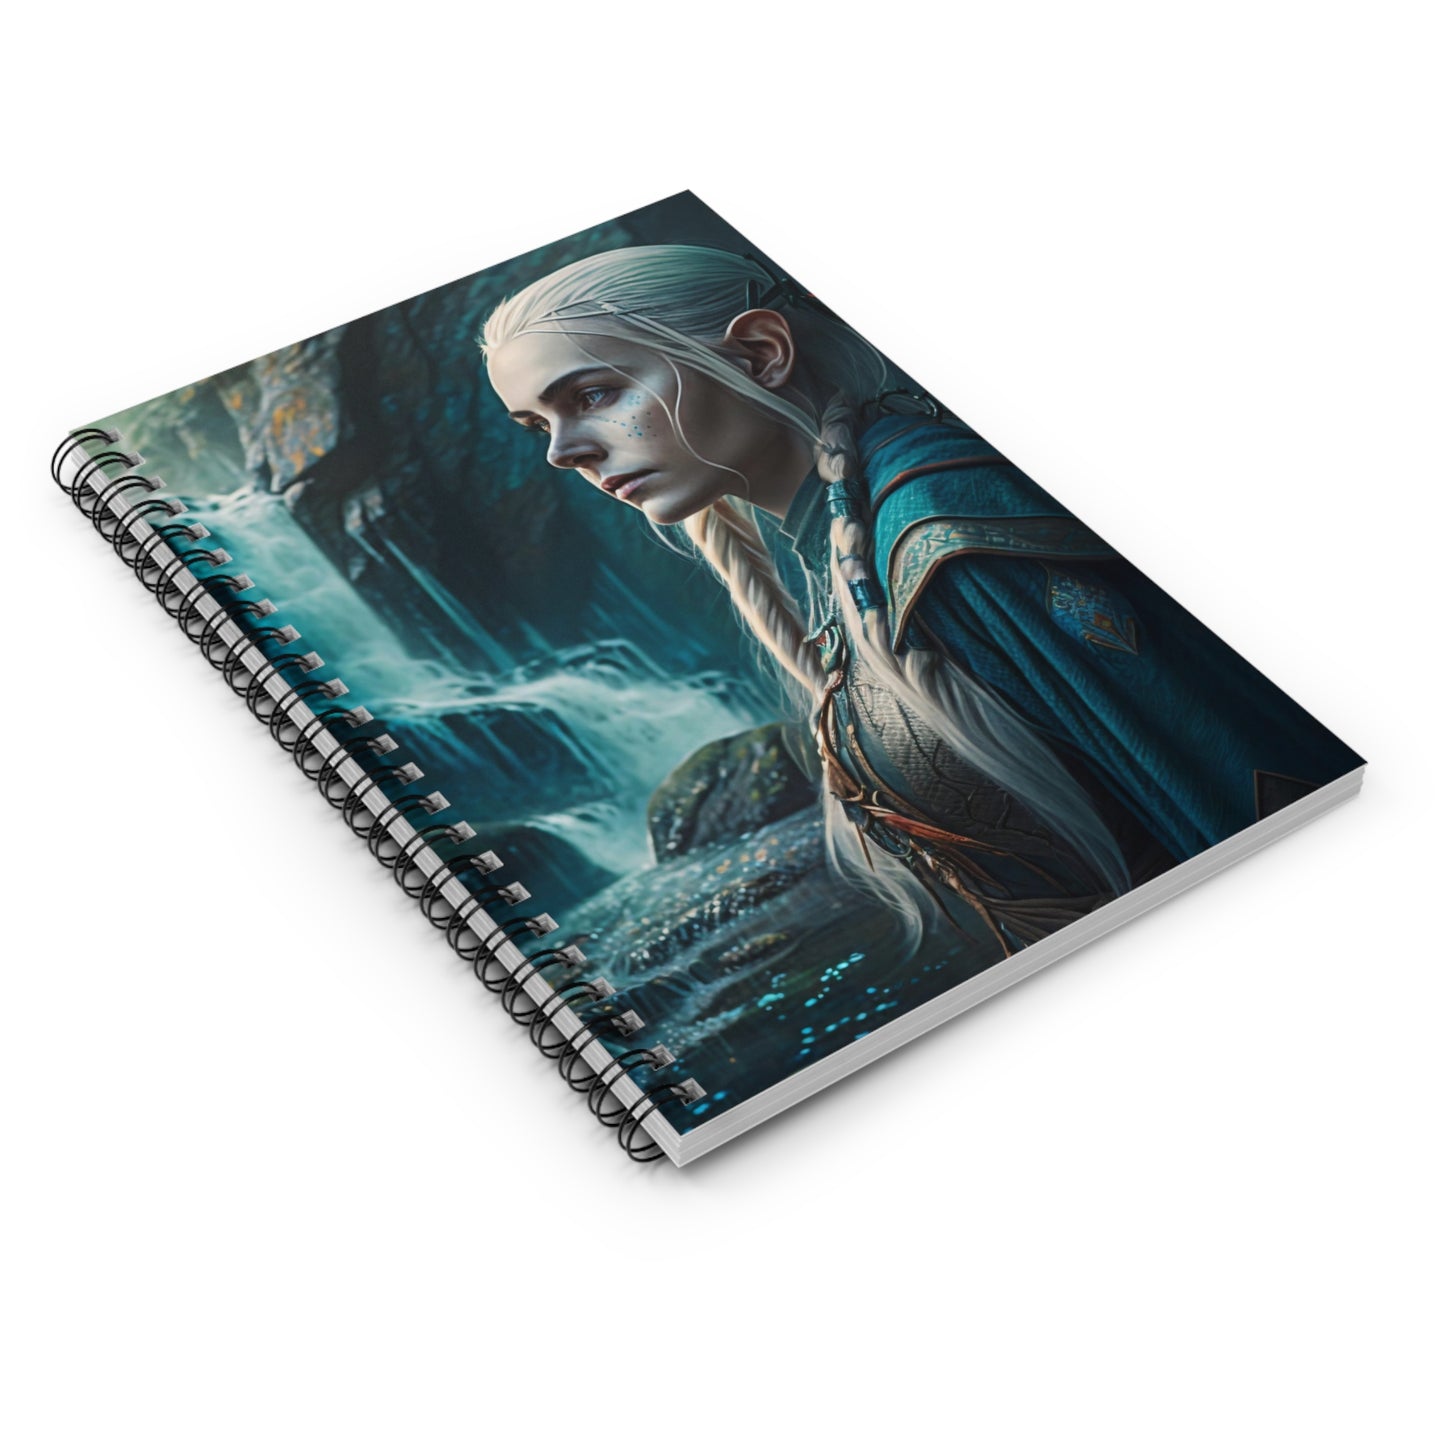 DnD Campaign Journal, Elf by Waterfall Spiral Notebook, Ruled Line, Tabletop Gaming D&D Character Notepad, Pathfinder Journal, Serene Realms